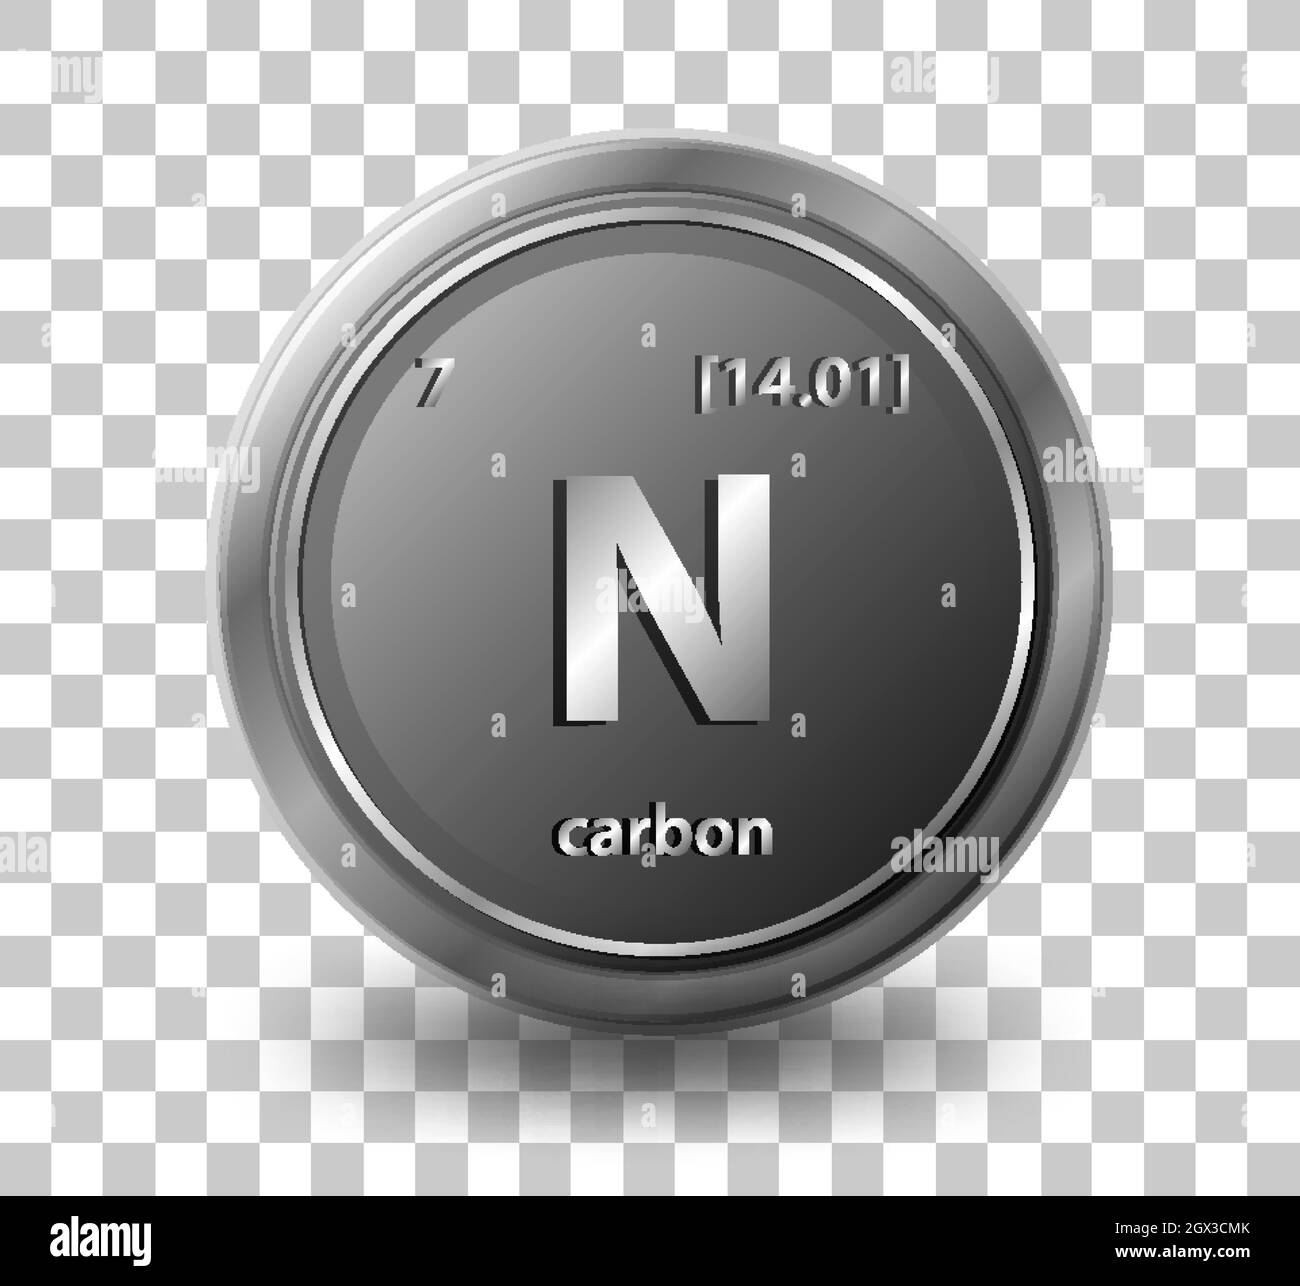 Carbon chemical element. Chemical symbol with atomic number and atomic mass. Stock Vector